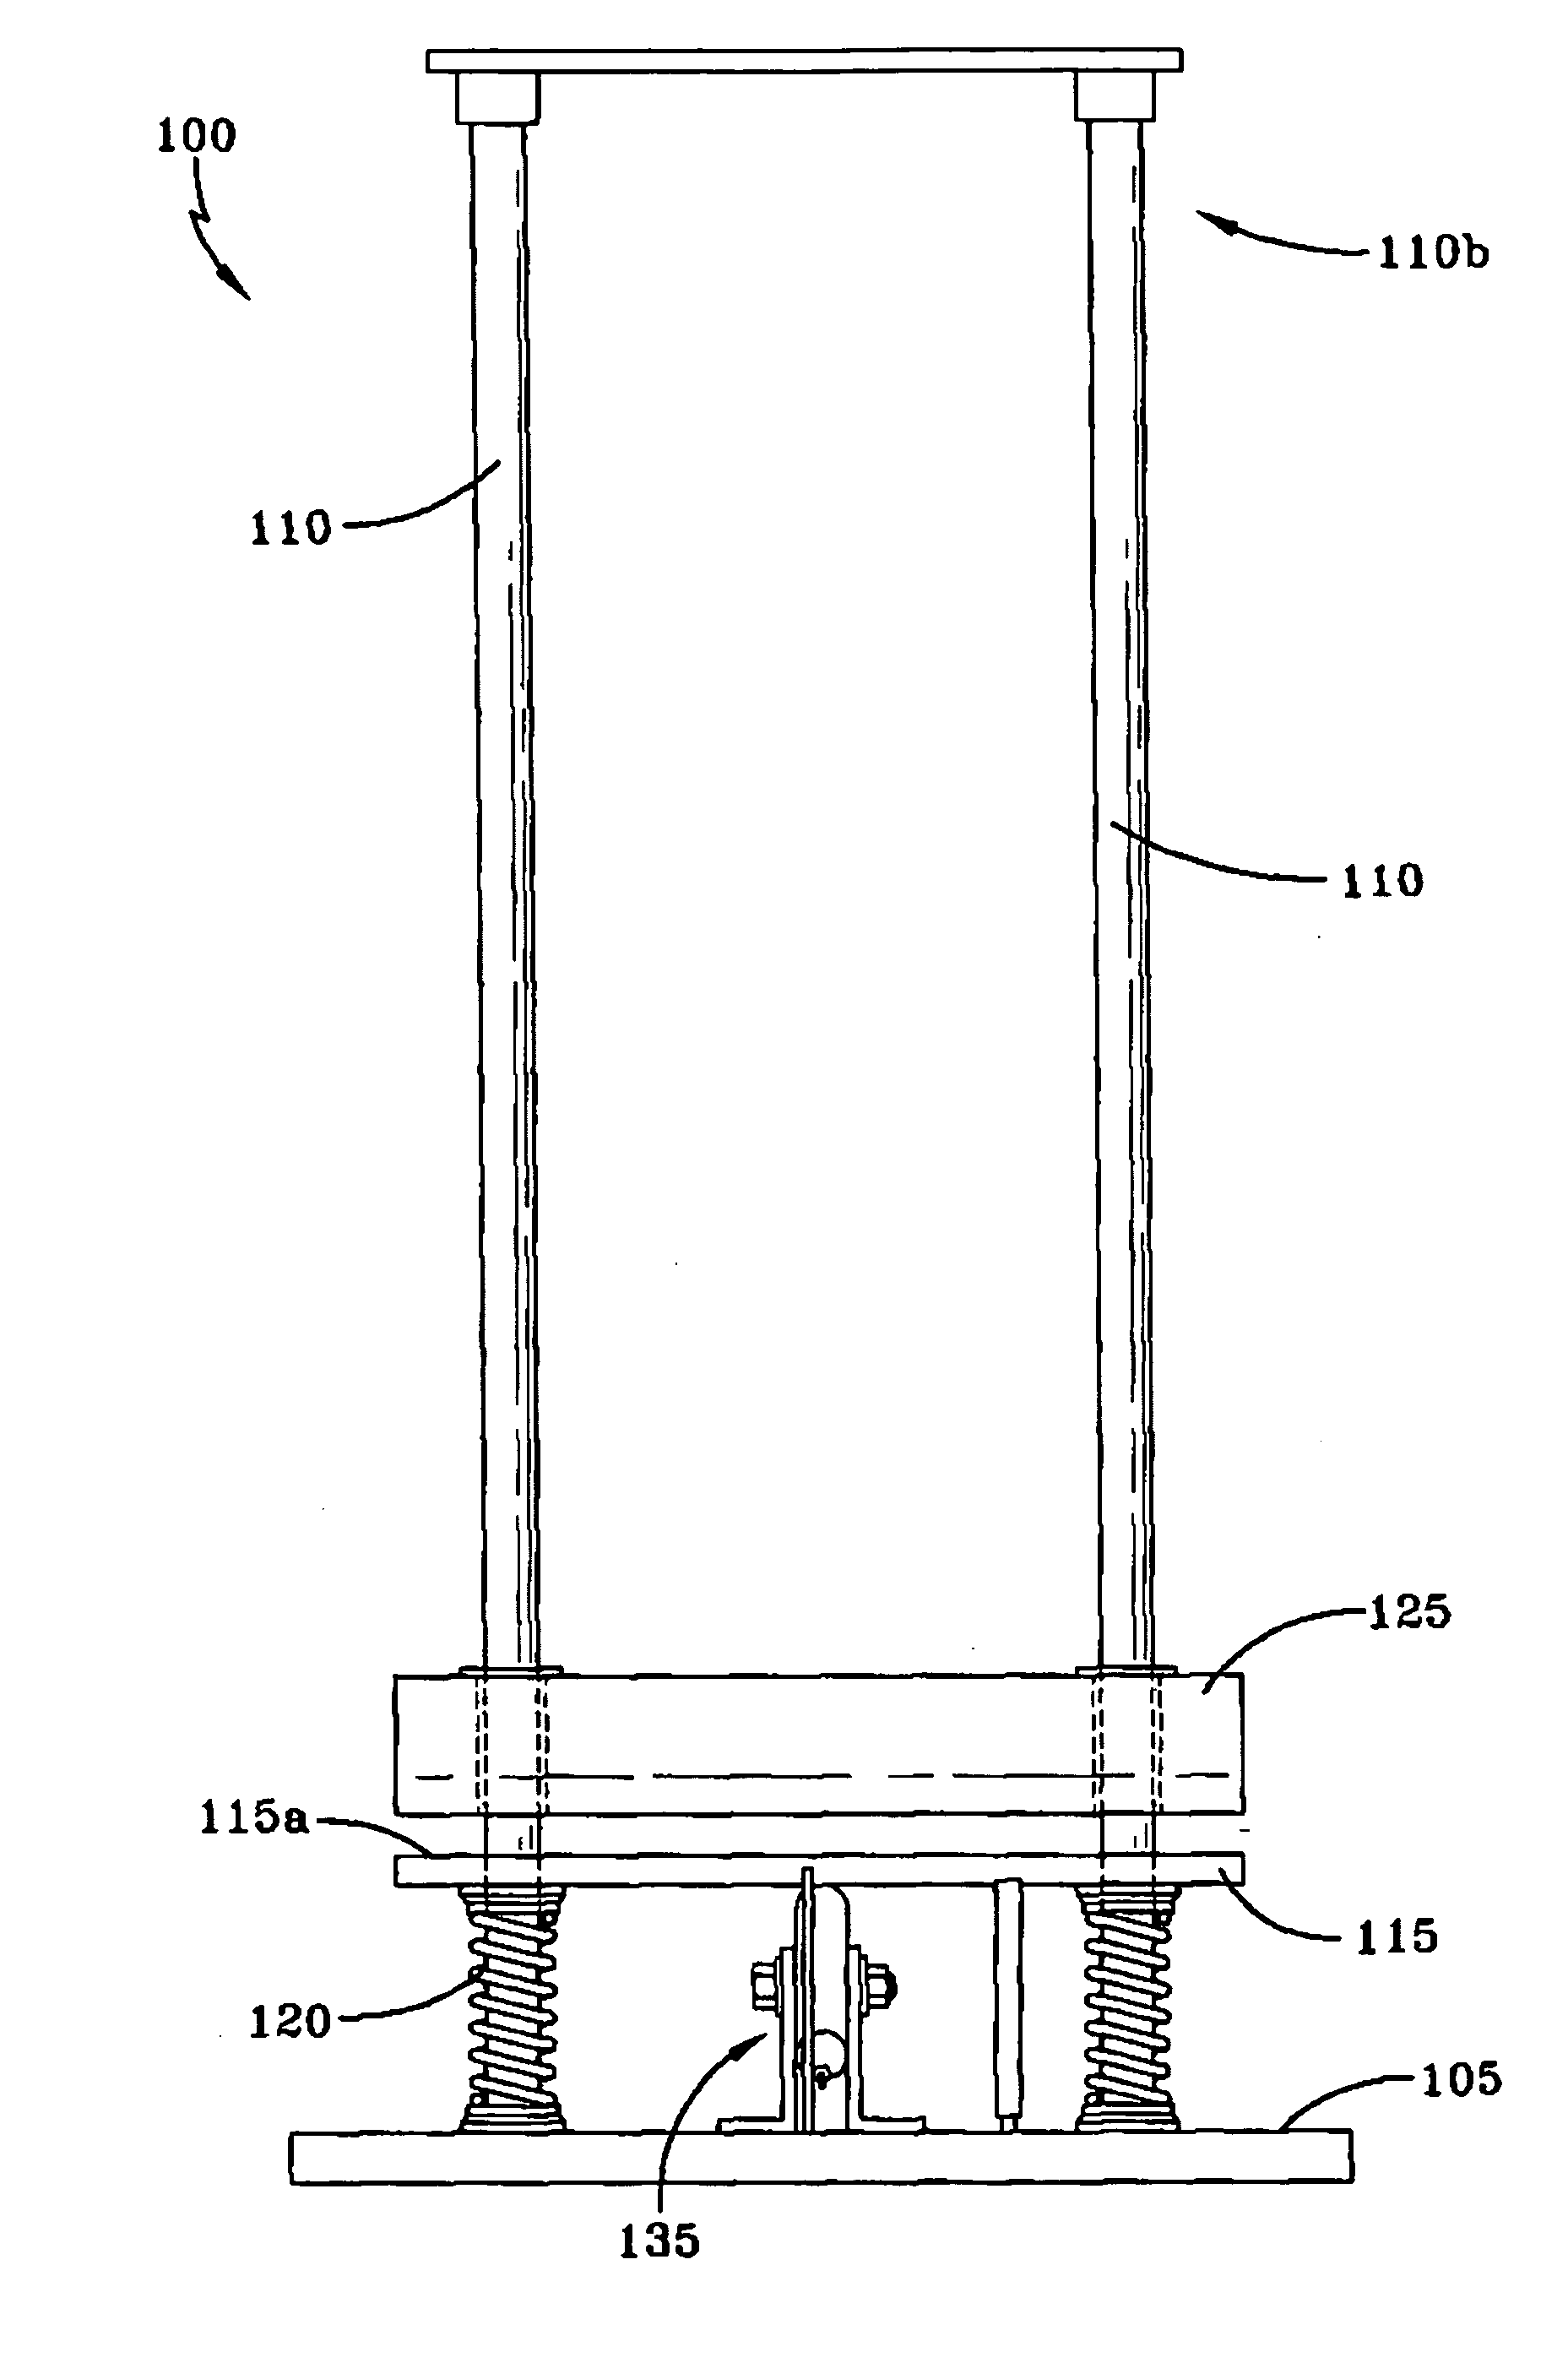 Apparatus and method for testing an impact and/or vibration absorbent material